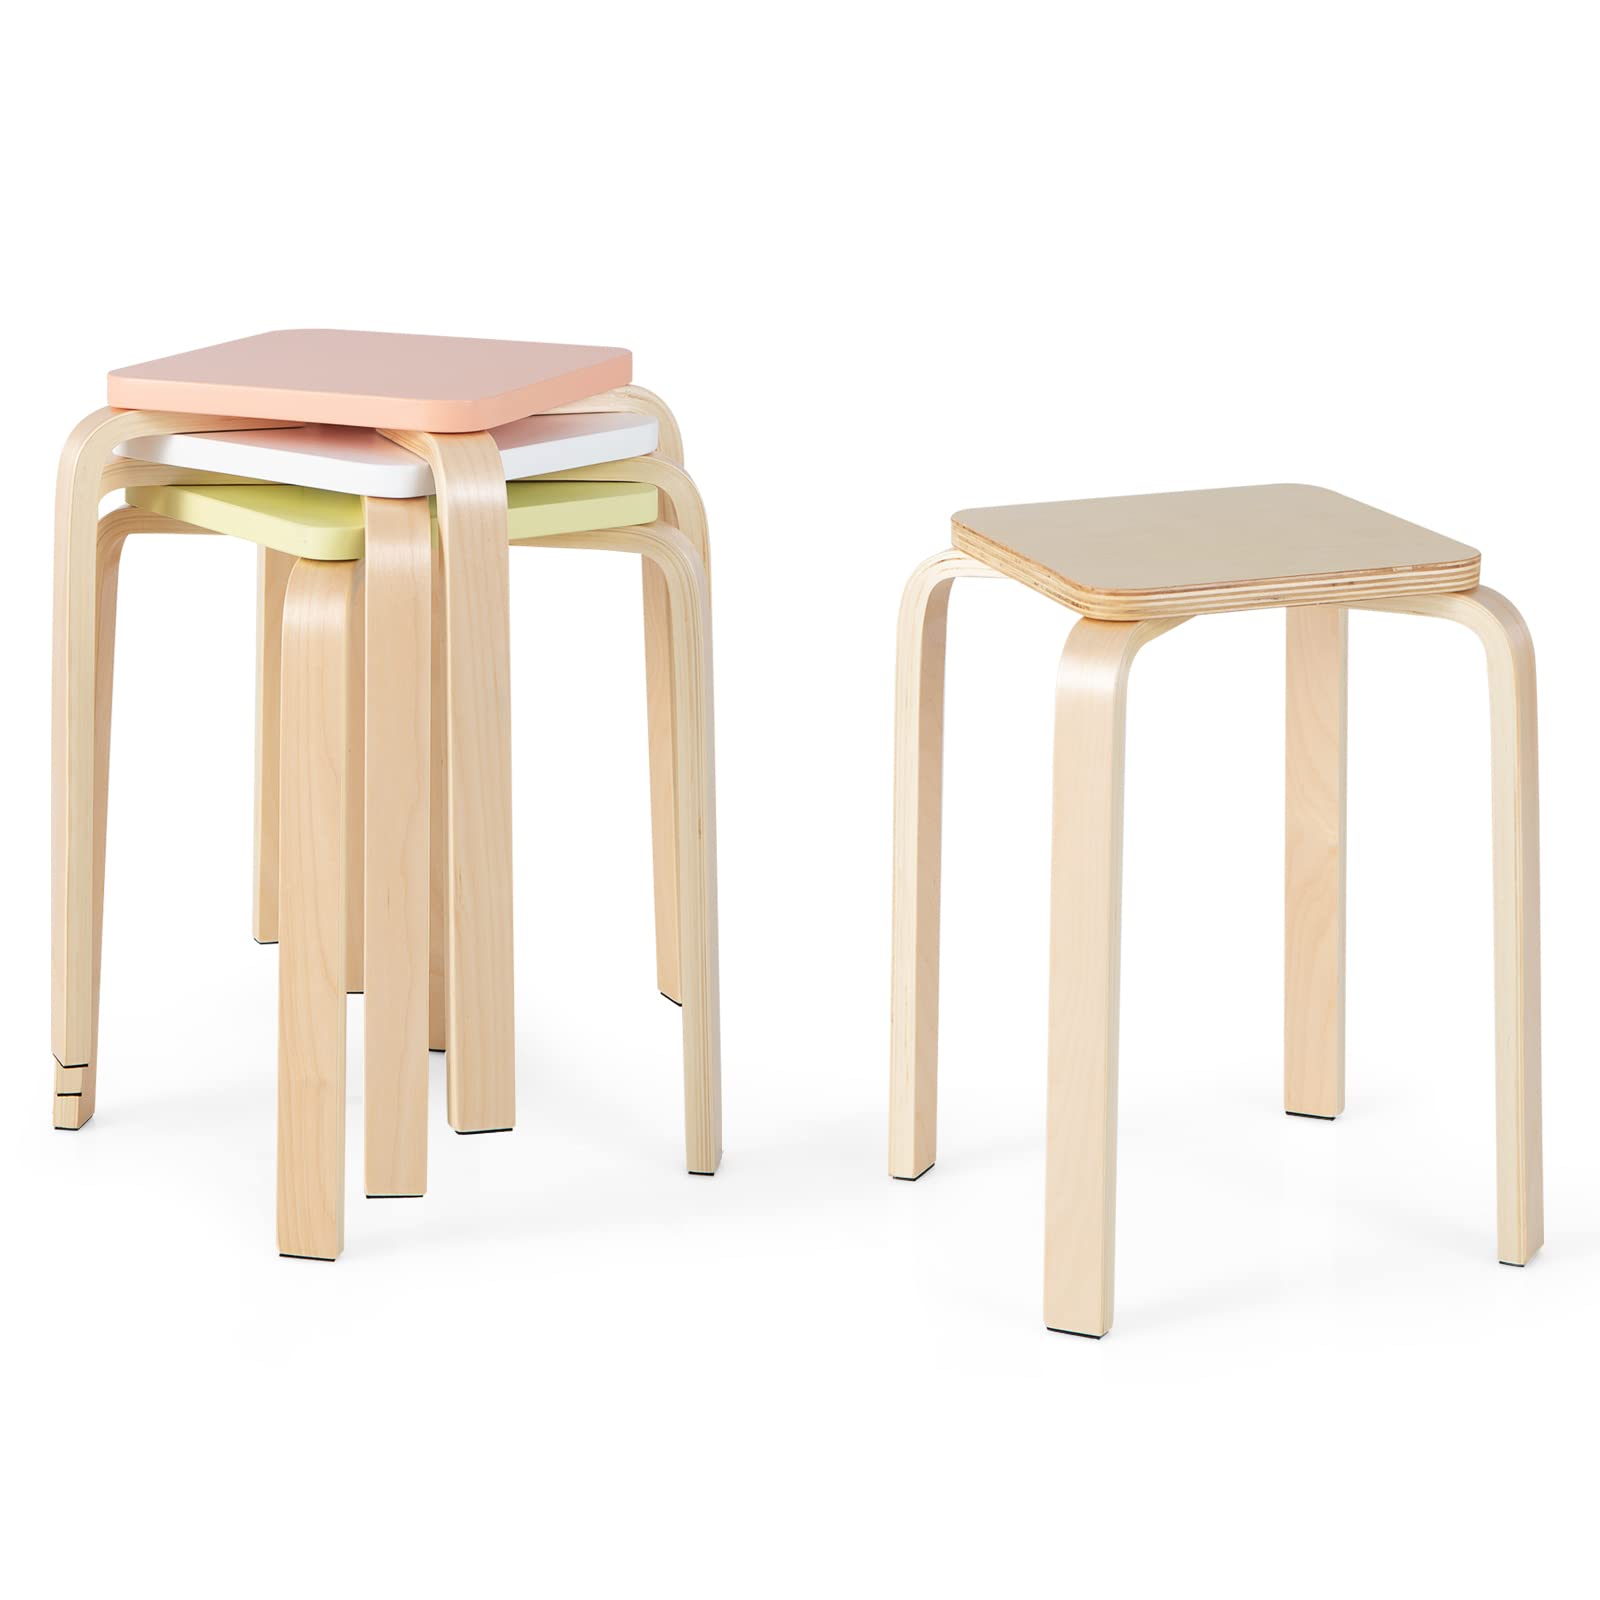 Stackable Wooden Stools Set of 4, Portable 18-Inch Height Backless School Stools